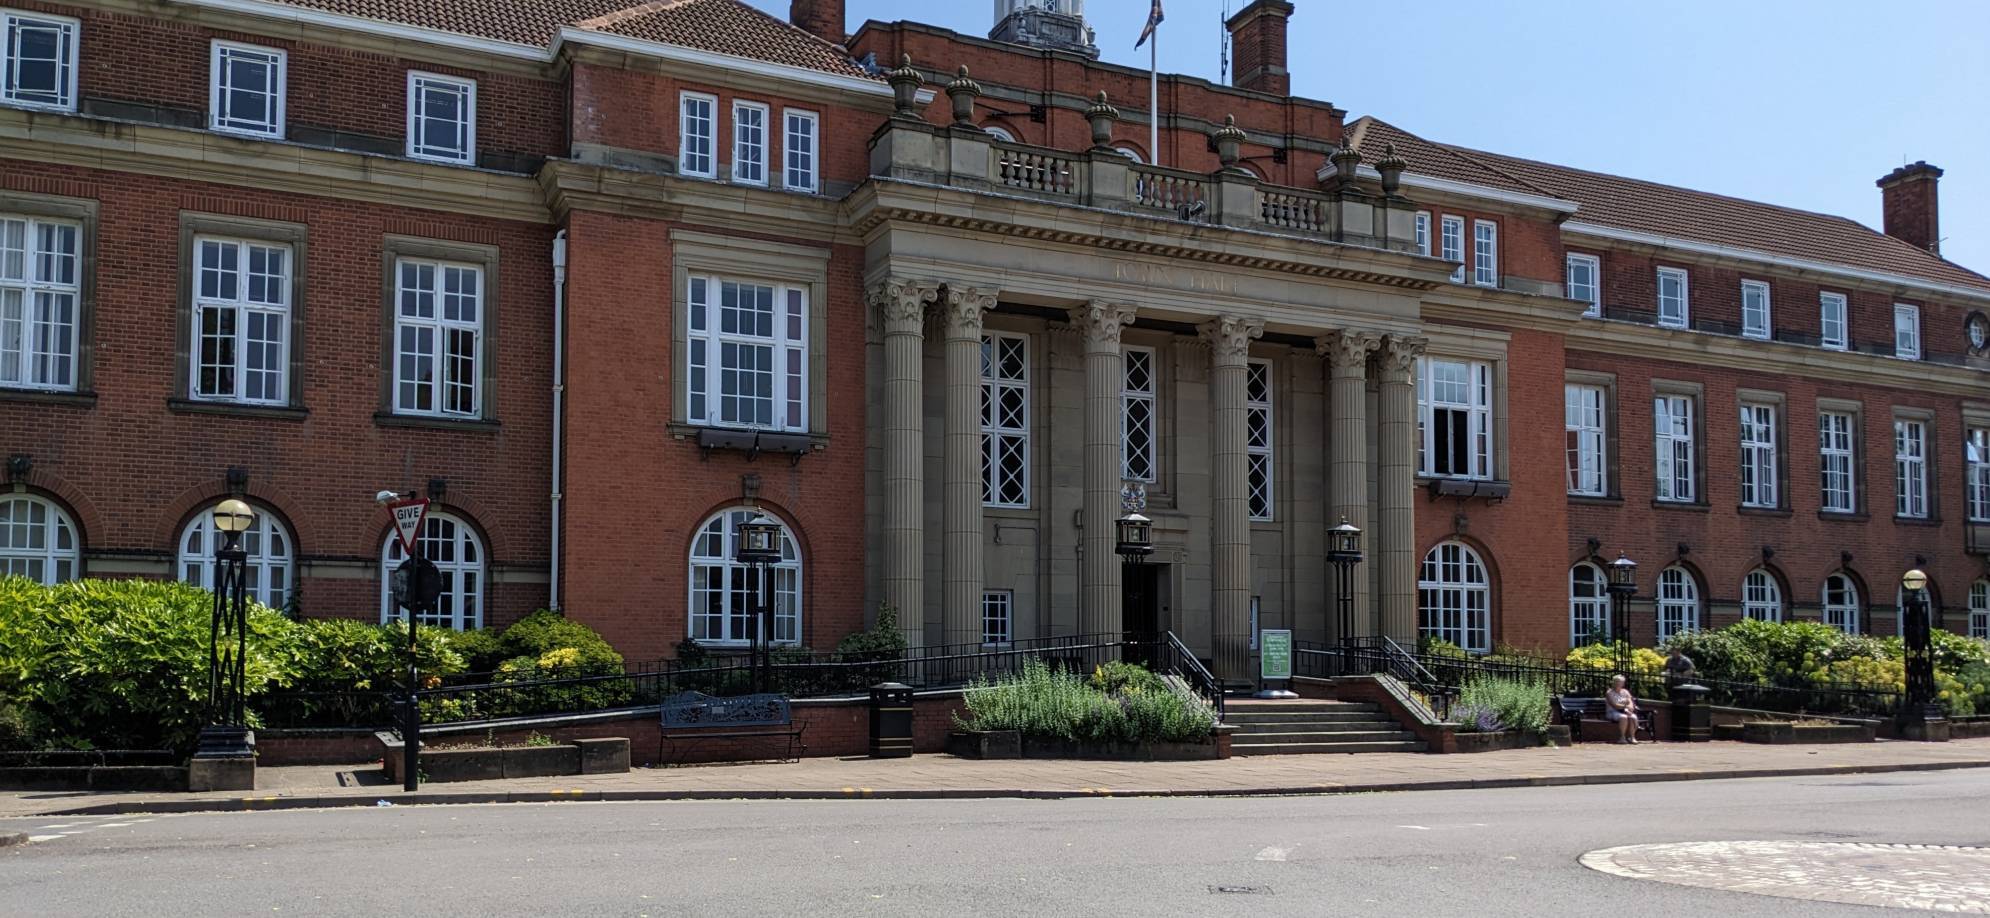 Front of Nuneaton Town Hall building